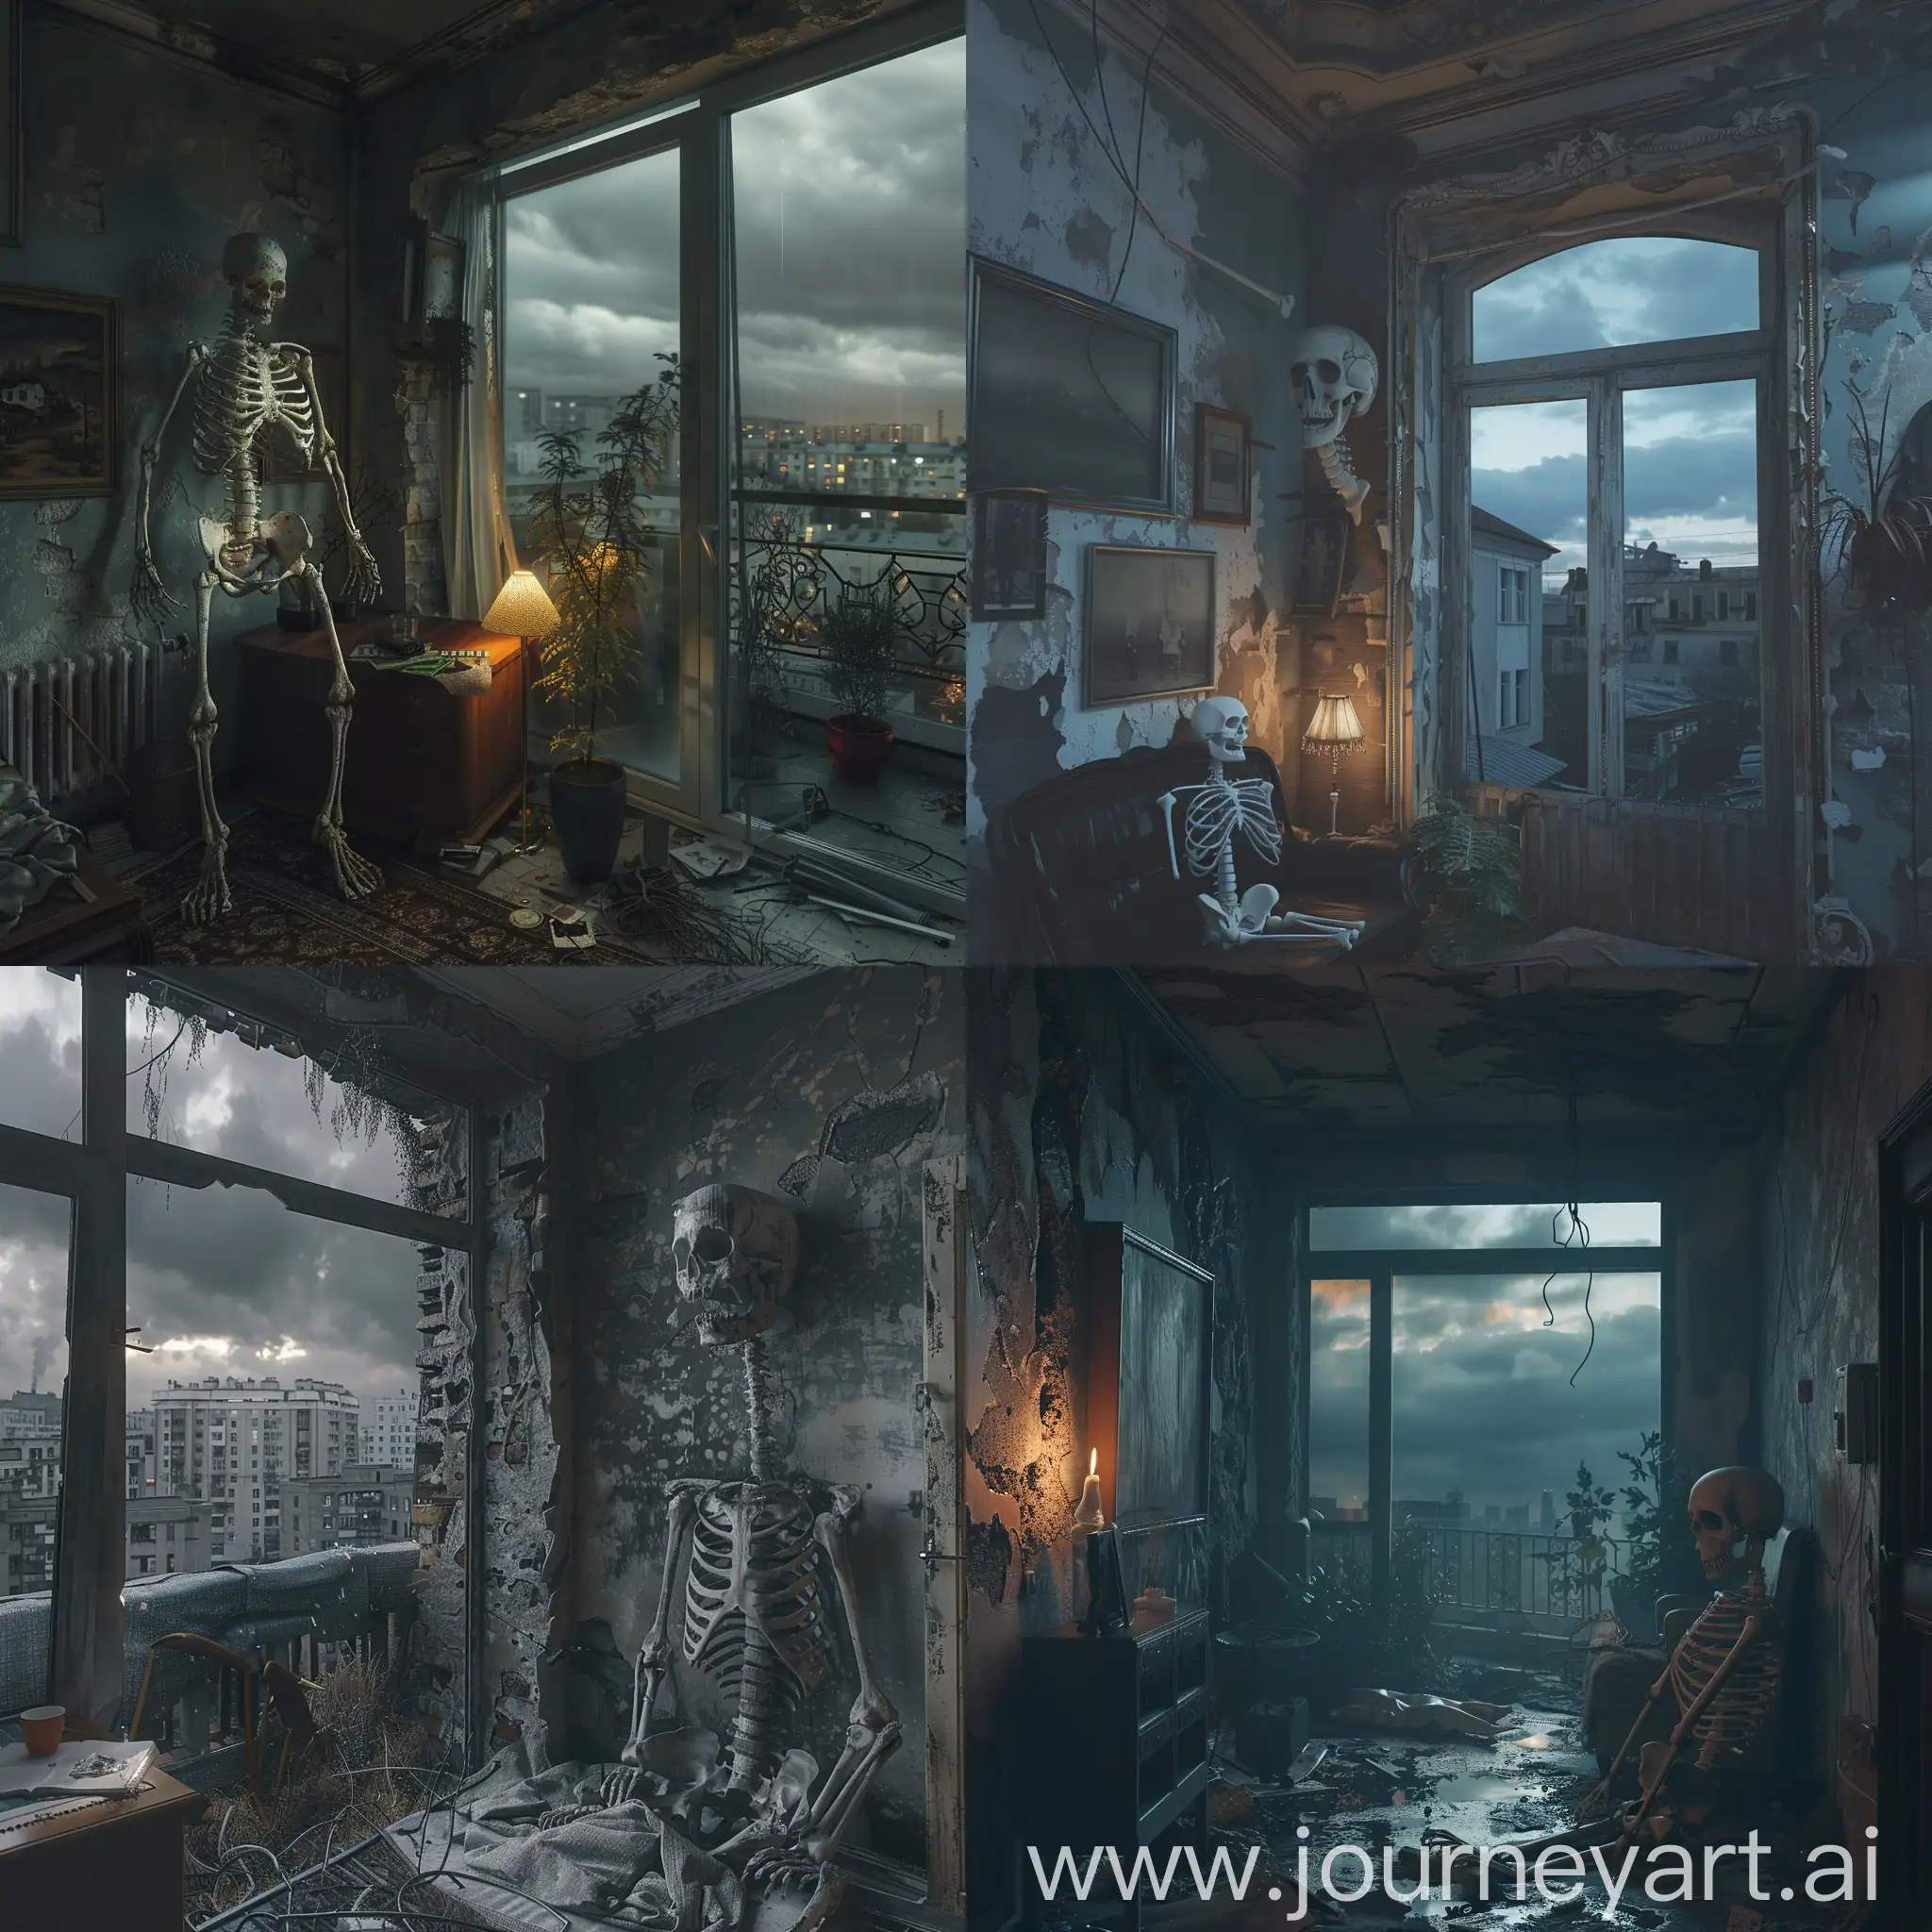 Gloomy-Abandoned-Apartment-in-Rosi-Haunting-PostApocalyptic-Scene-with-Ghostly-Skeleton